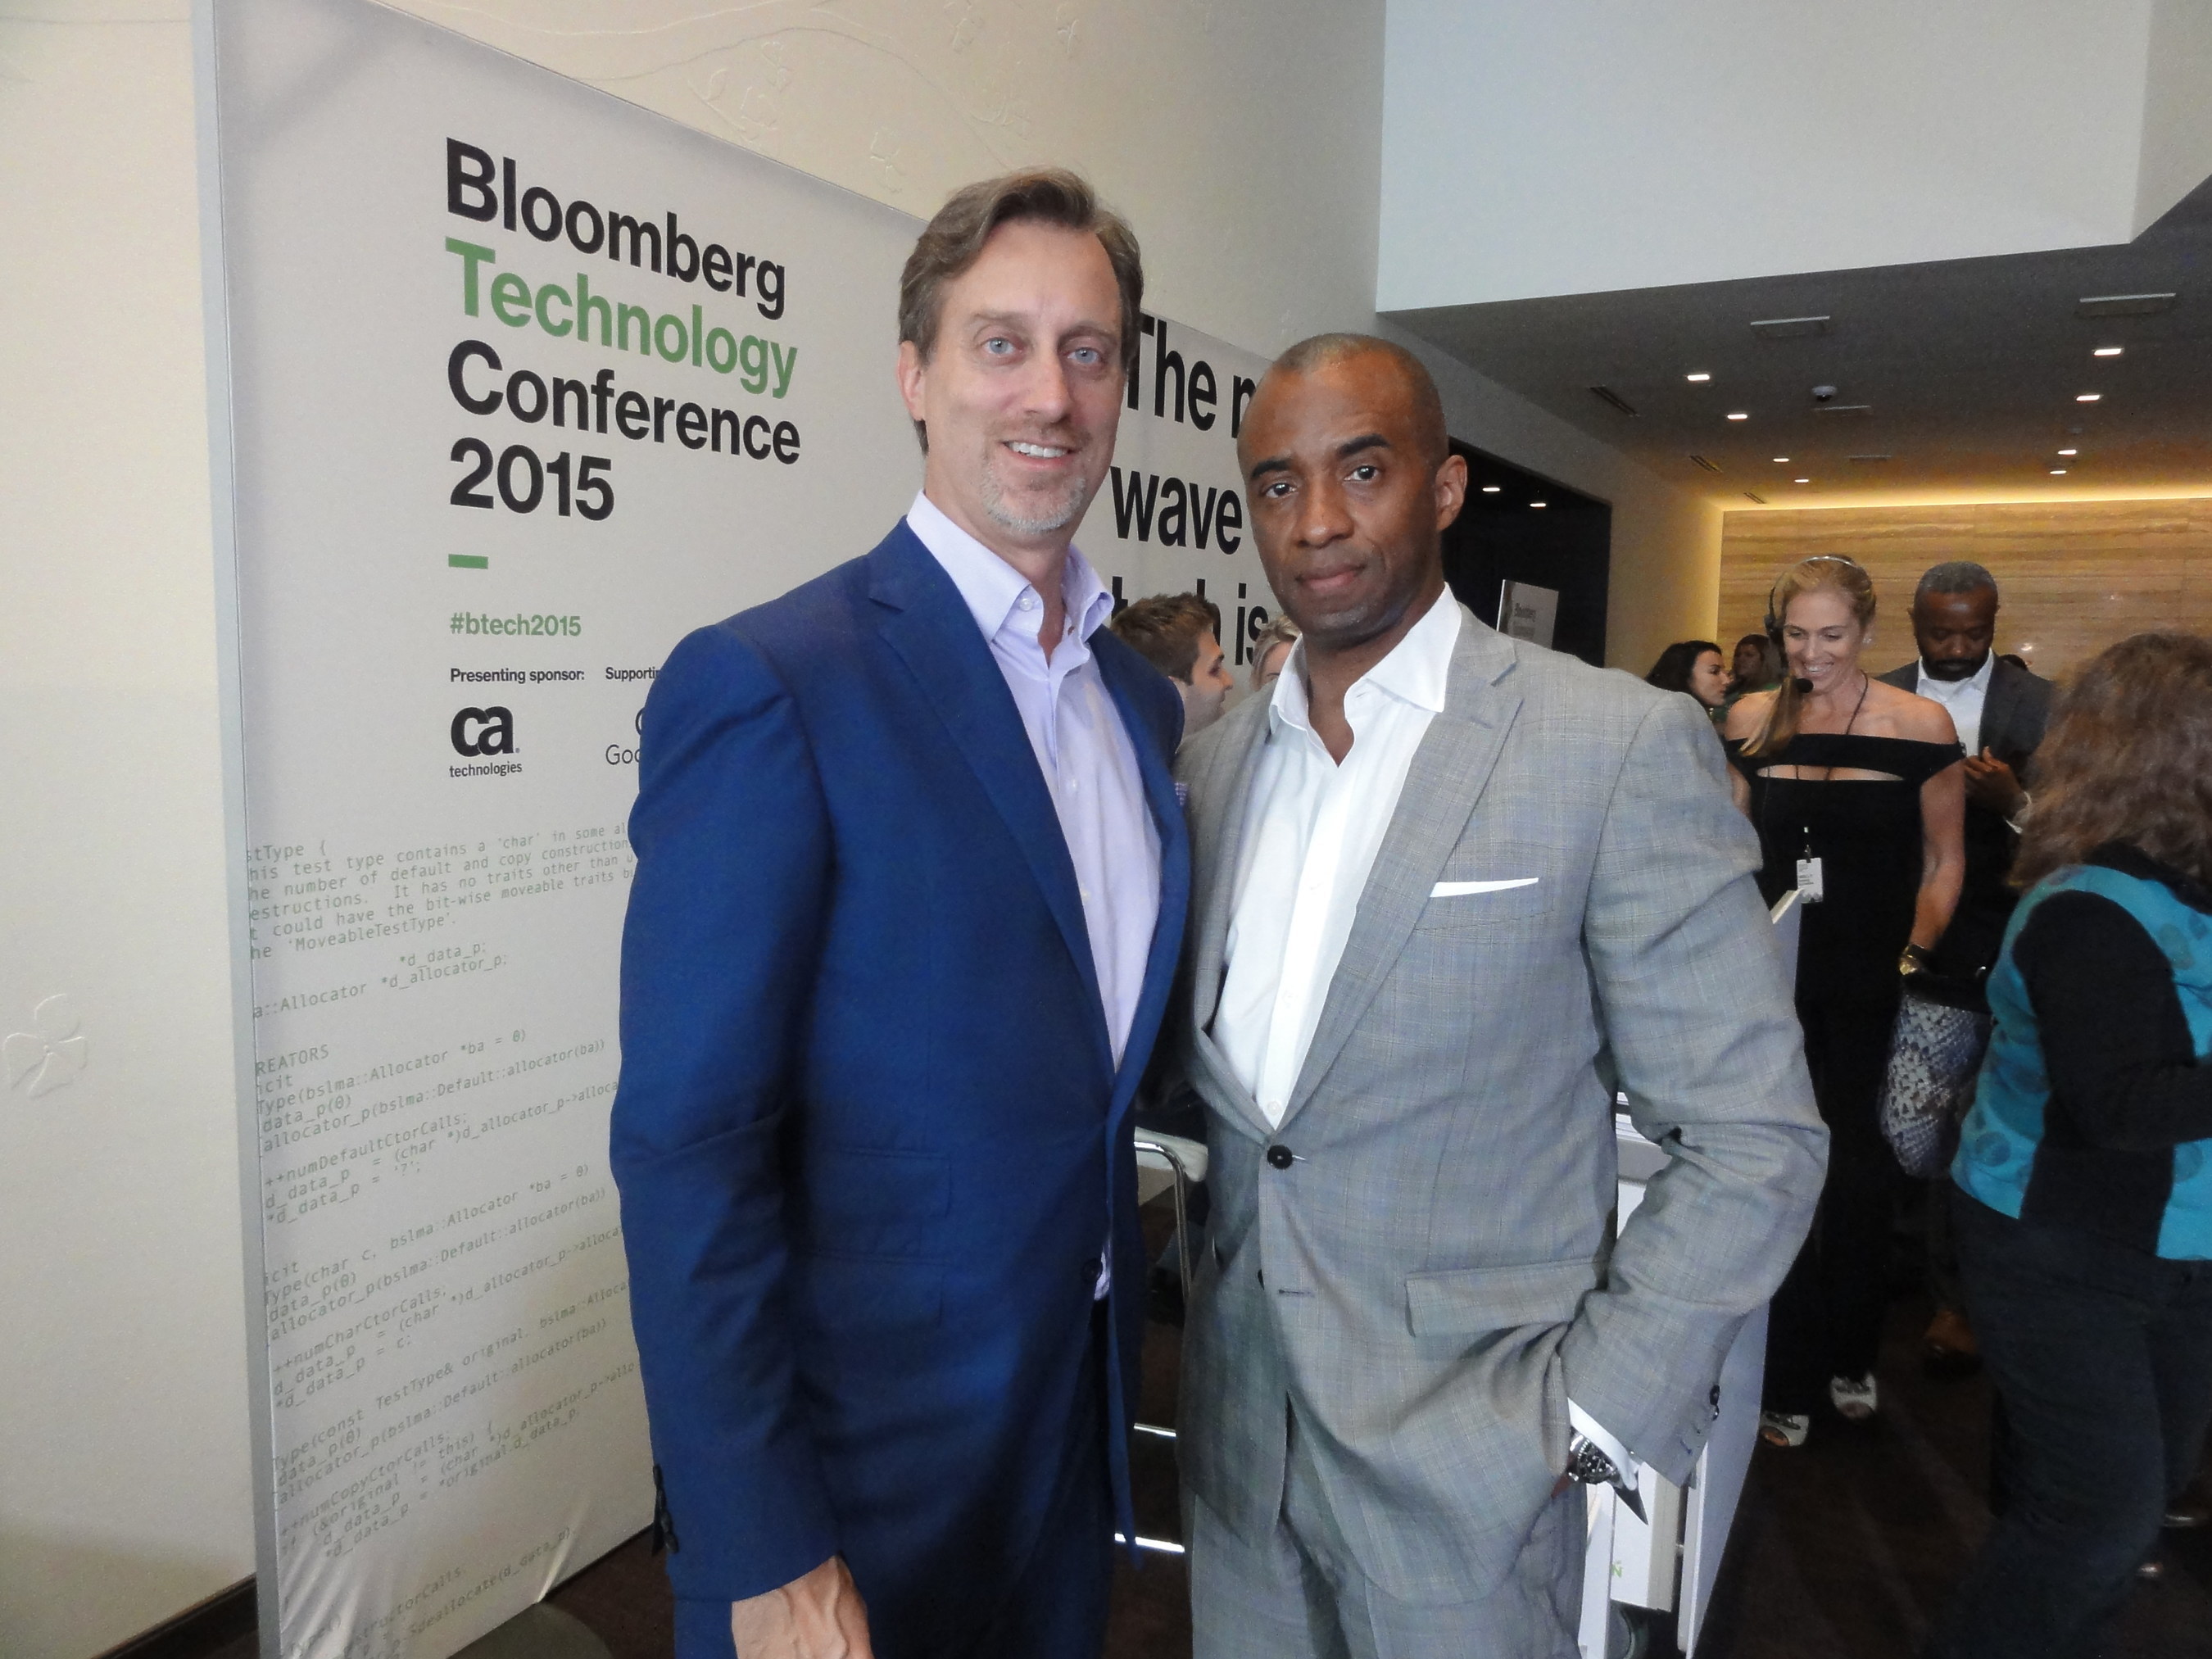 Shawn Baldwin (right), Chairman of AIA Group, an advisory and investment firm that specializes in alternative investments, foreign exchange, derivatives and commodities markets, with Cory Johnson, anchor and editor-at-large for Bloomberg Television.